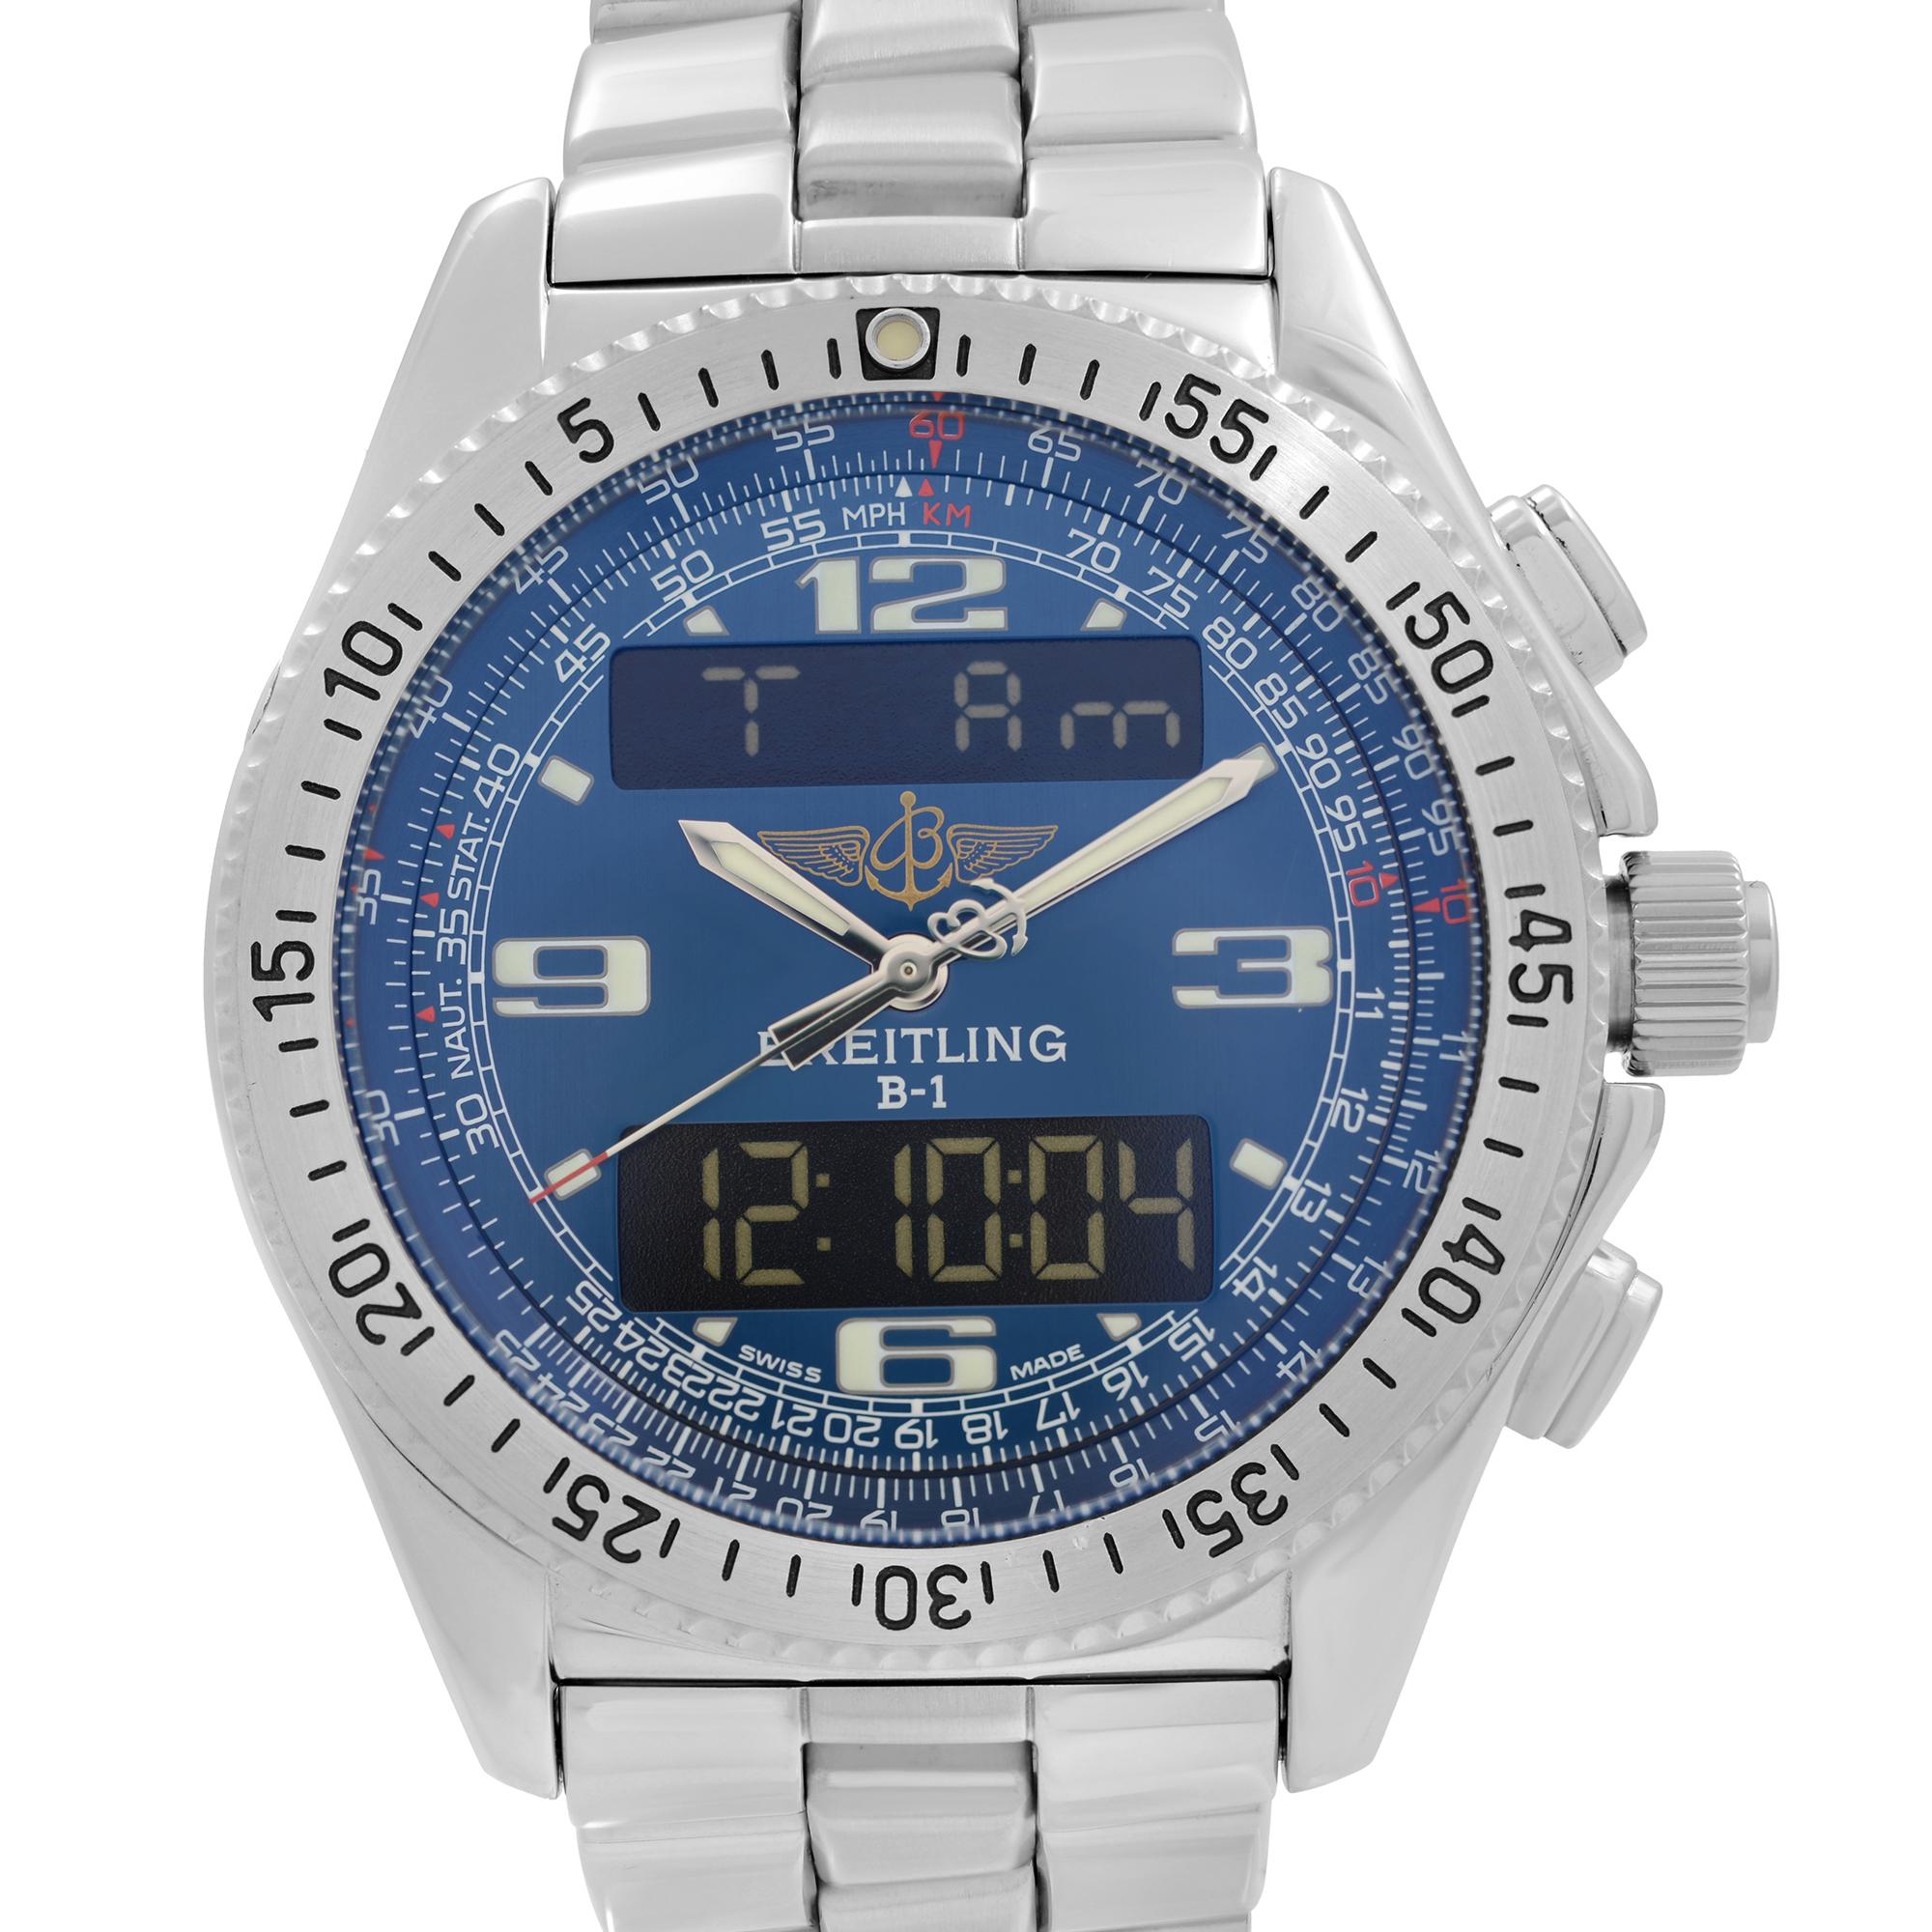 Pre-Owned Breitling B1 Chronograph Steel Analog-Digital Blue Dial Men's Quartz Watch A68362. This Beautiful Timepiece Features: Stainless Steel Case with a Stainless Steel Bracelet. Bi-directional Rotating Steel Bezel. Blue Dial with Luminous